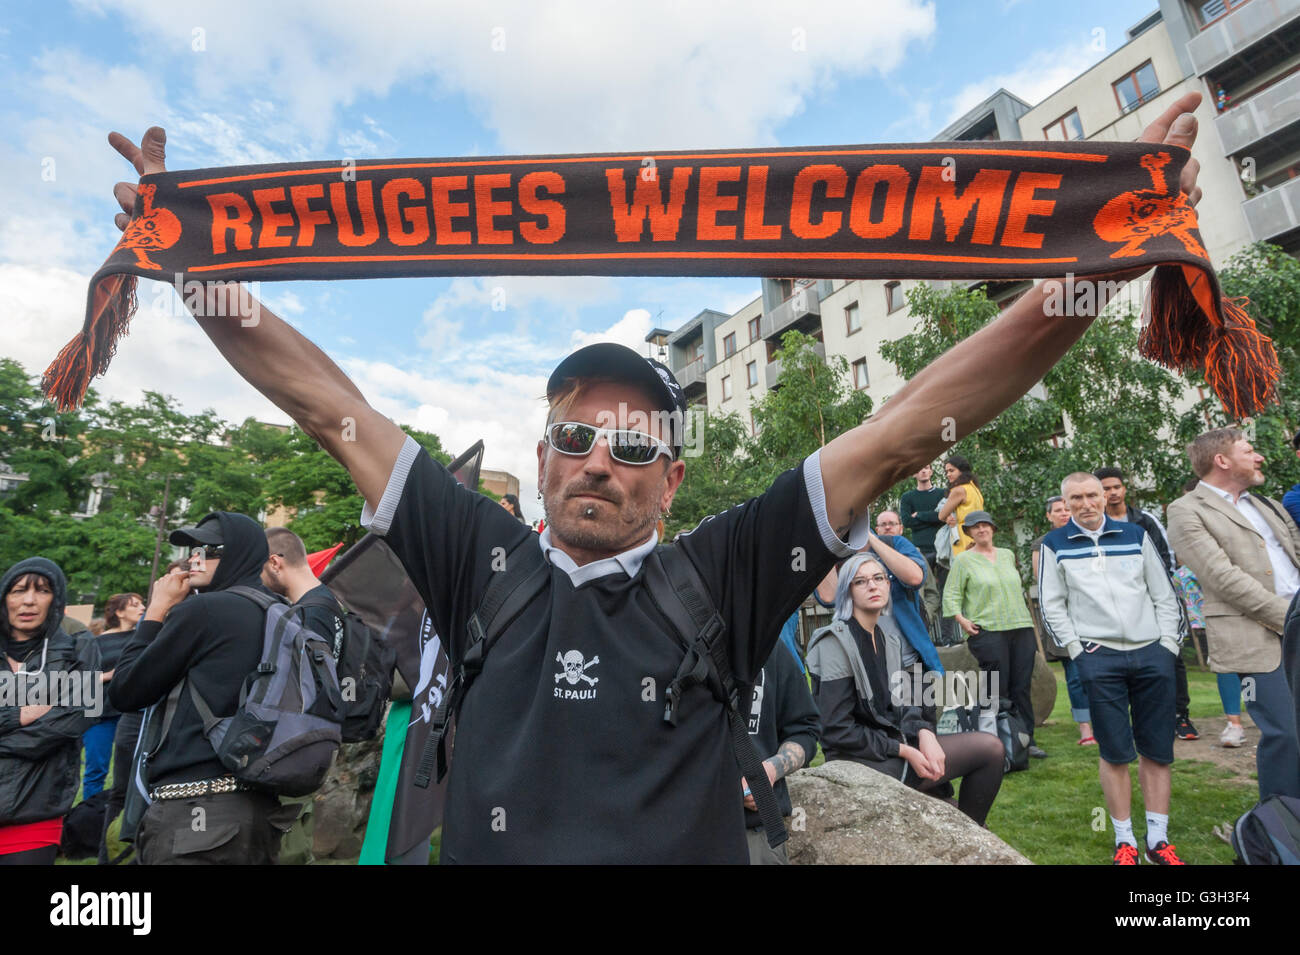 London, UK. June 24th 2016. An anti-fascist protester in a Hamburg St Pauli shirt holds up a scarf with the messge 'Refugees Welcome' at the rally in Altab Ali Park on the day after the UK voted to leave the EU against racism, for migrant rights and against fascist violence. They say that migration and immigrants have been attacked and scapegoated not only by both Remain and Leave campaigns but by mainstream parties and media over more than 20 years, stoking up hatred by insisting immigrants are a 'problem'.Peter Marshall/Alamy Live News Stock Photo